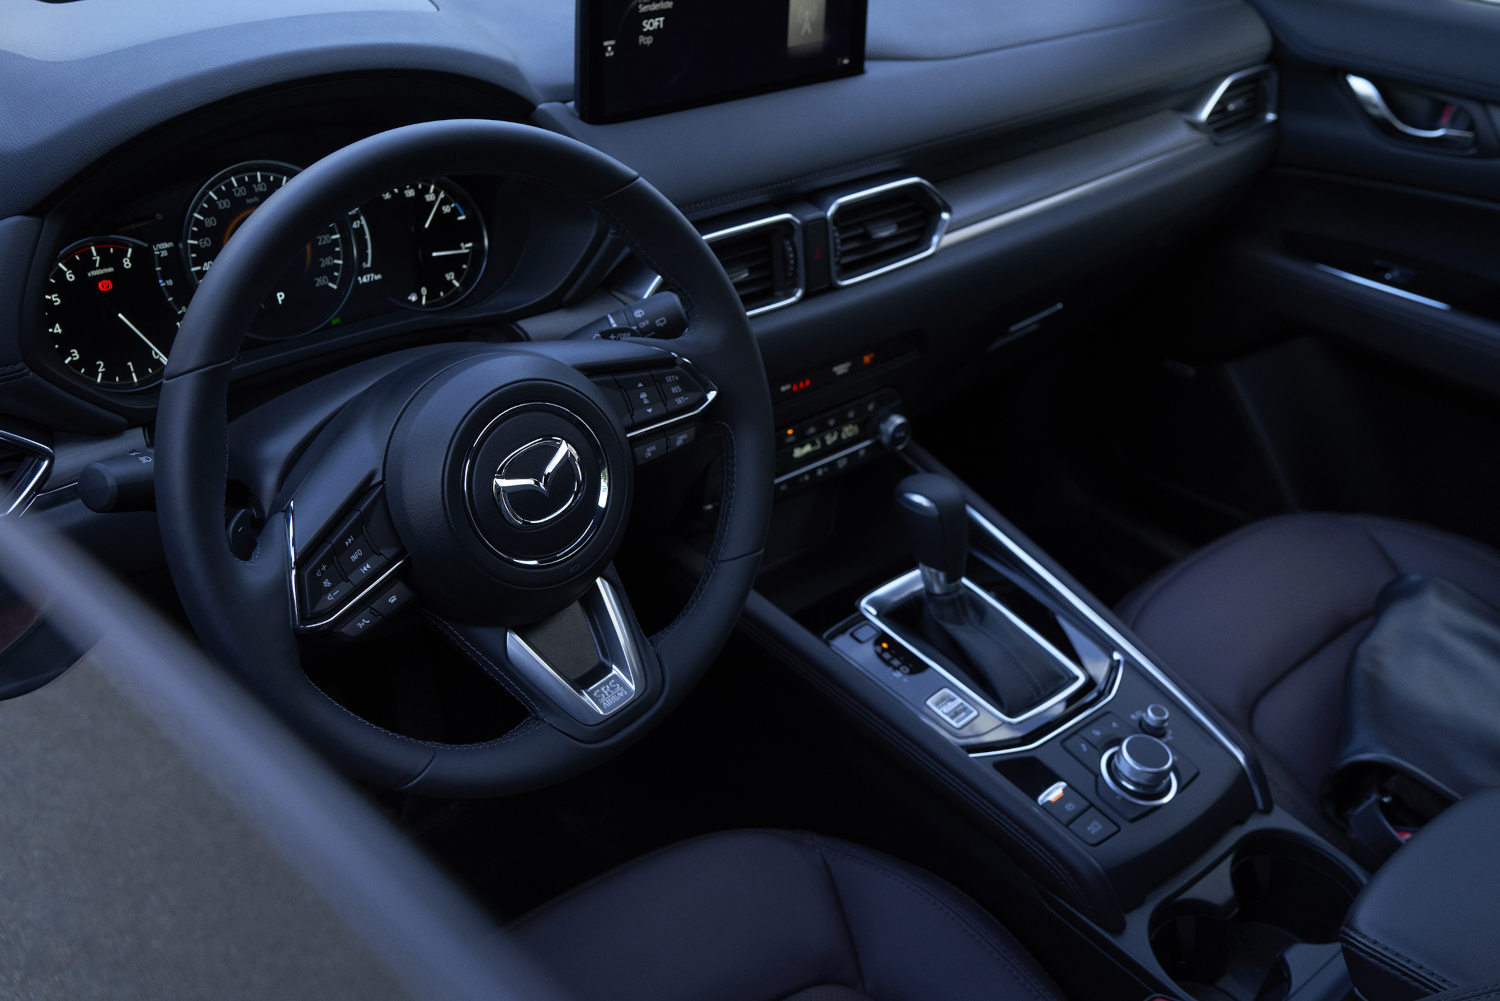 Inside the best compact SUV of 2023, the Mazda CX-5